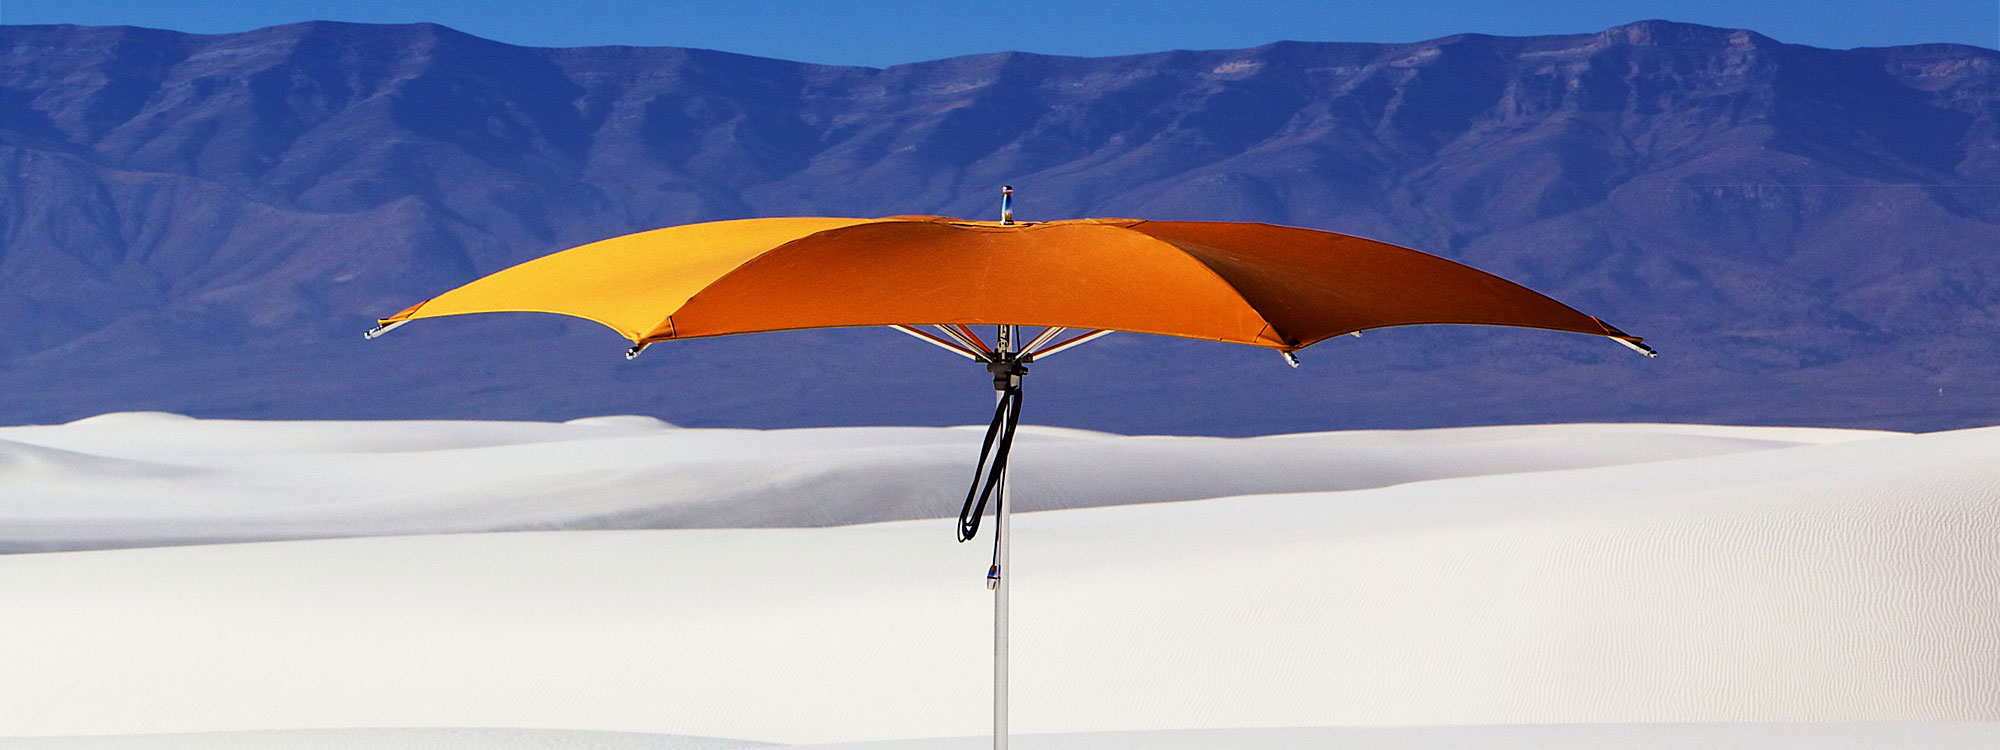 Image of orange Ocean Master Crescent parasol with polished titanium mast and ribs, with sand dunes and mountains in the background